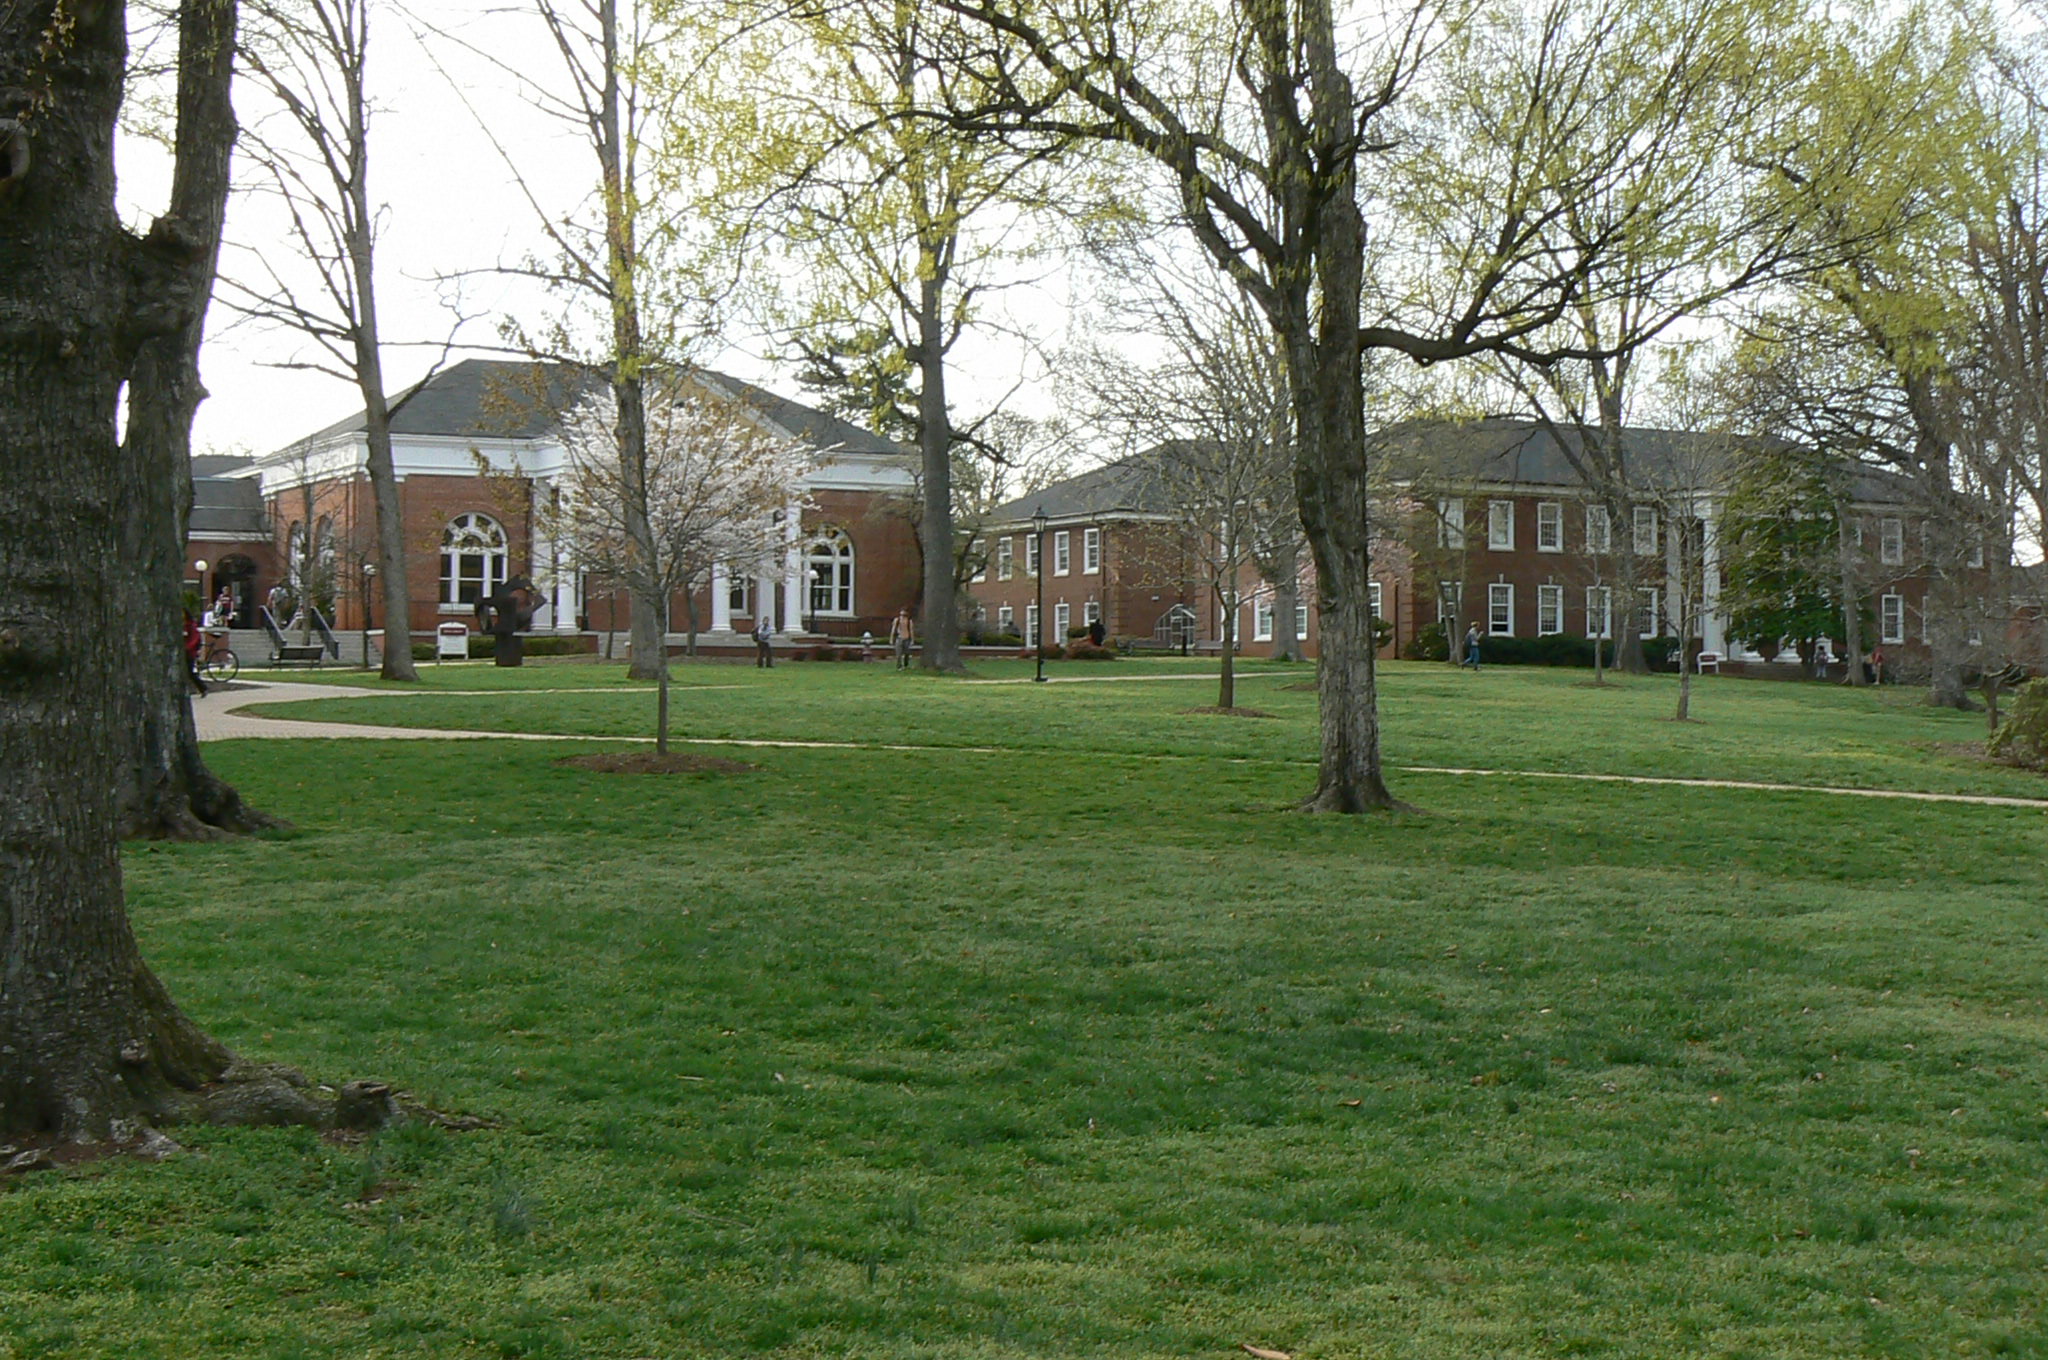 guilford-college-011.jpg